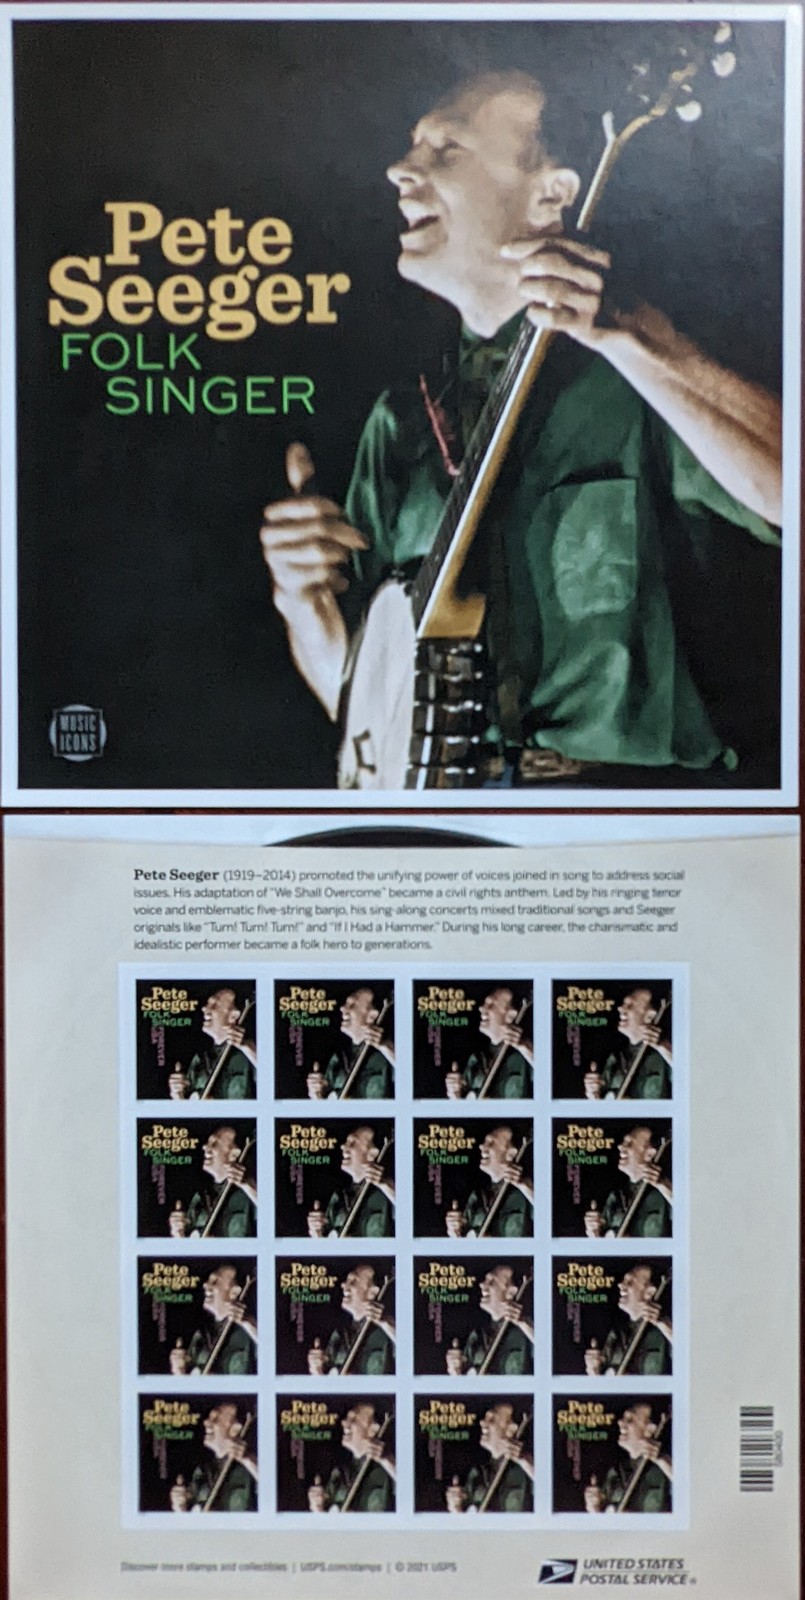 Primary image for Pete Seeger (1919-2022) USPS Forever Stamp Sheet 2022